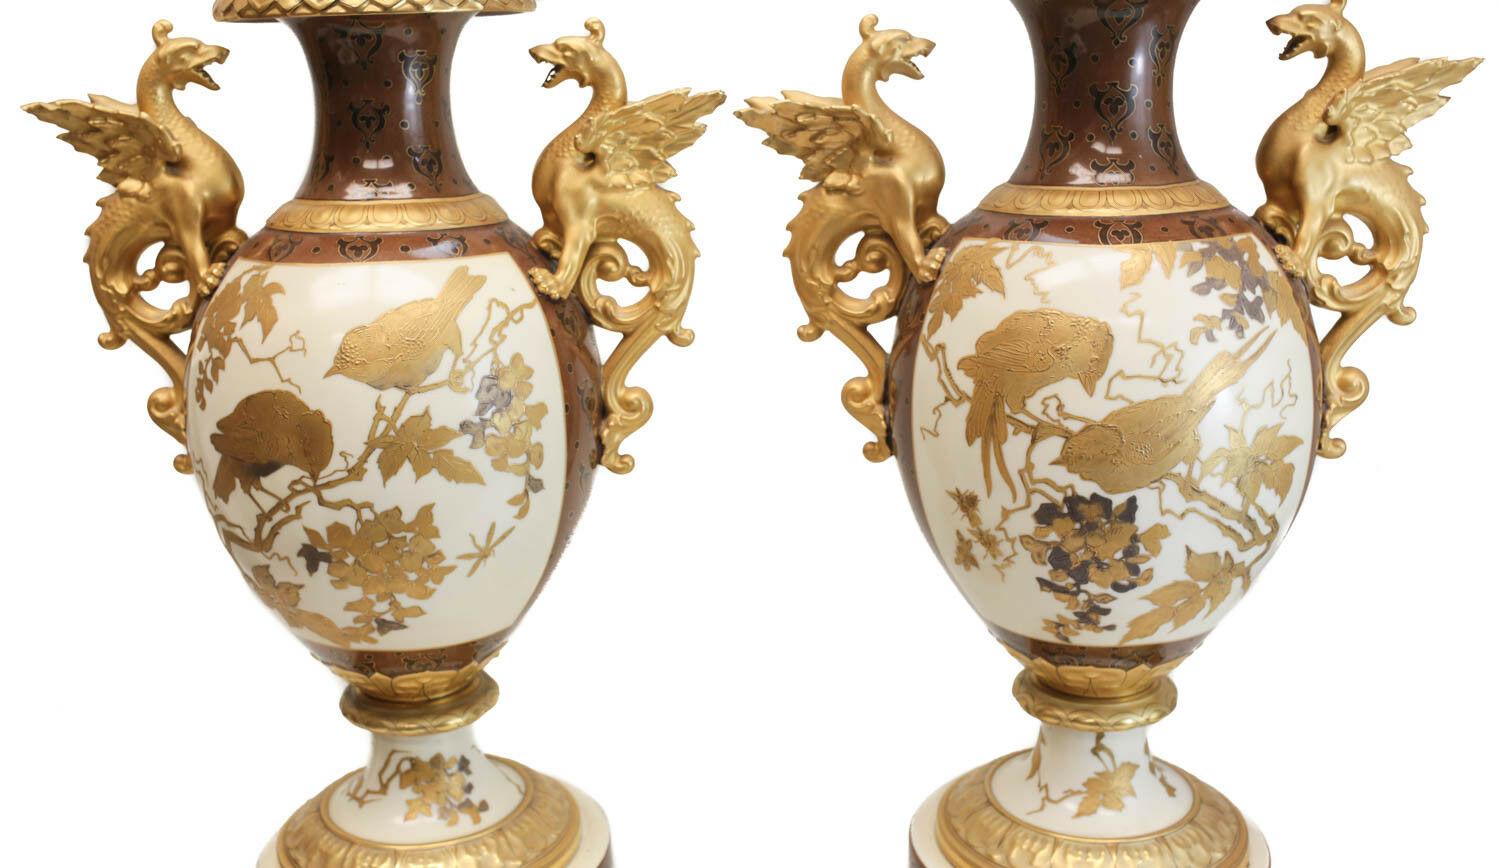 Description: Pair of Pirkenhammer porcelain aesthetic gold encrusted double handled footed vase, circa 1880. The central image of the urns depict gold encrusted birds perched on tree branches with more tree branches to the verso. Gold encrusted